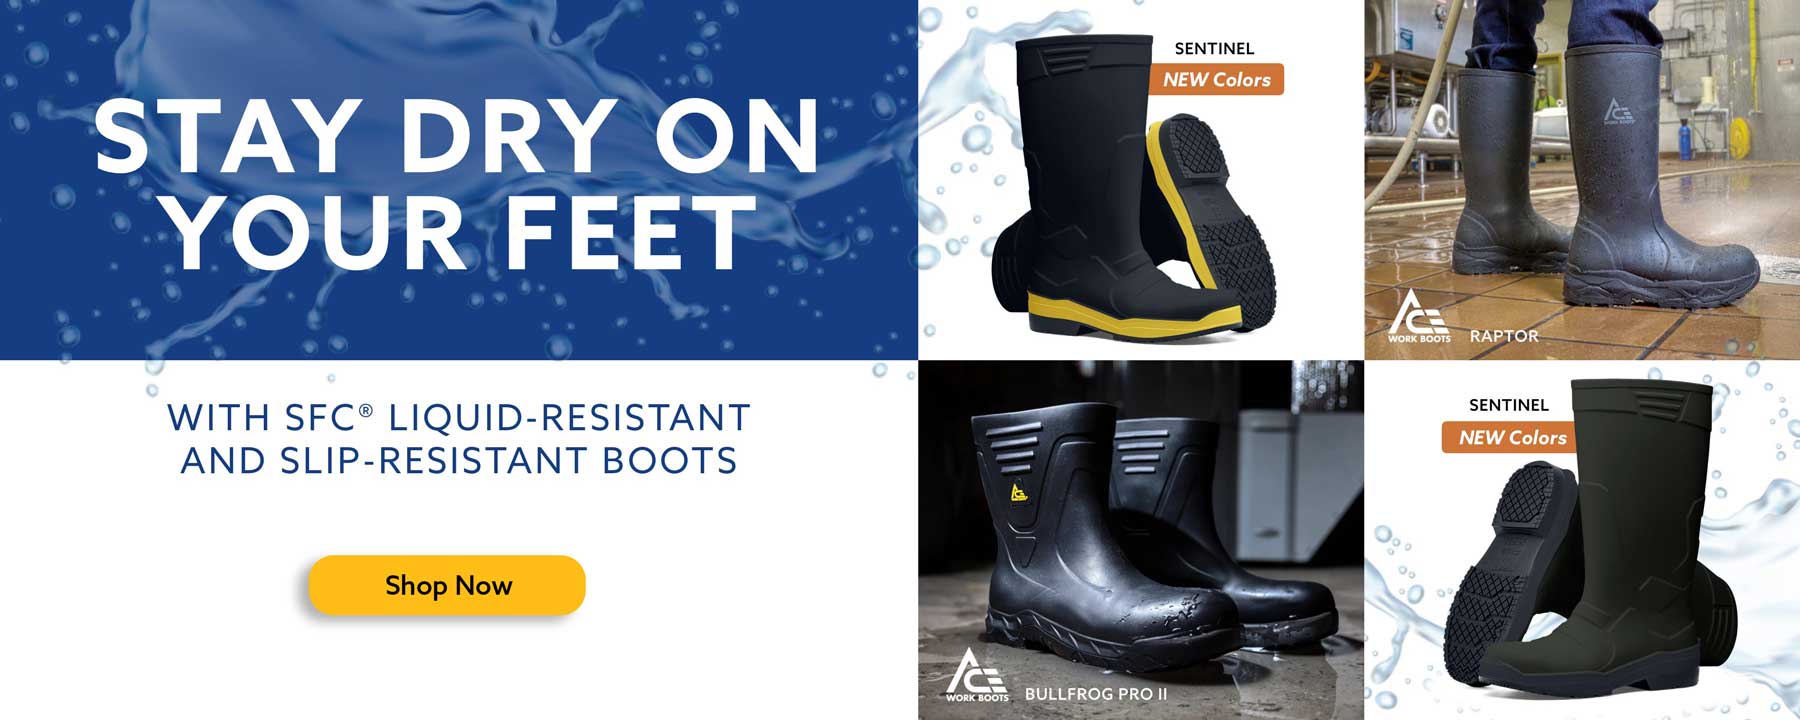 Keep the liquid out and stay dry - shop liquid resistant footwear